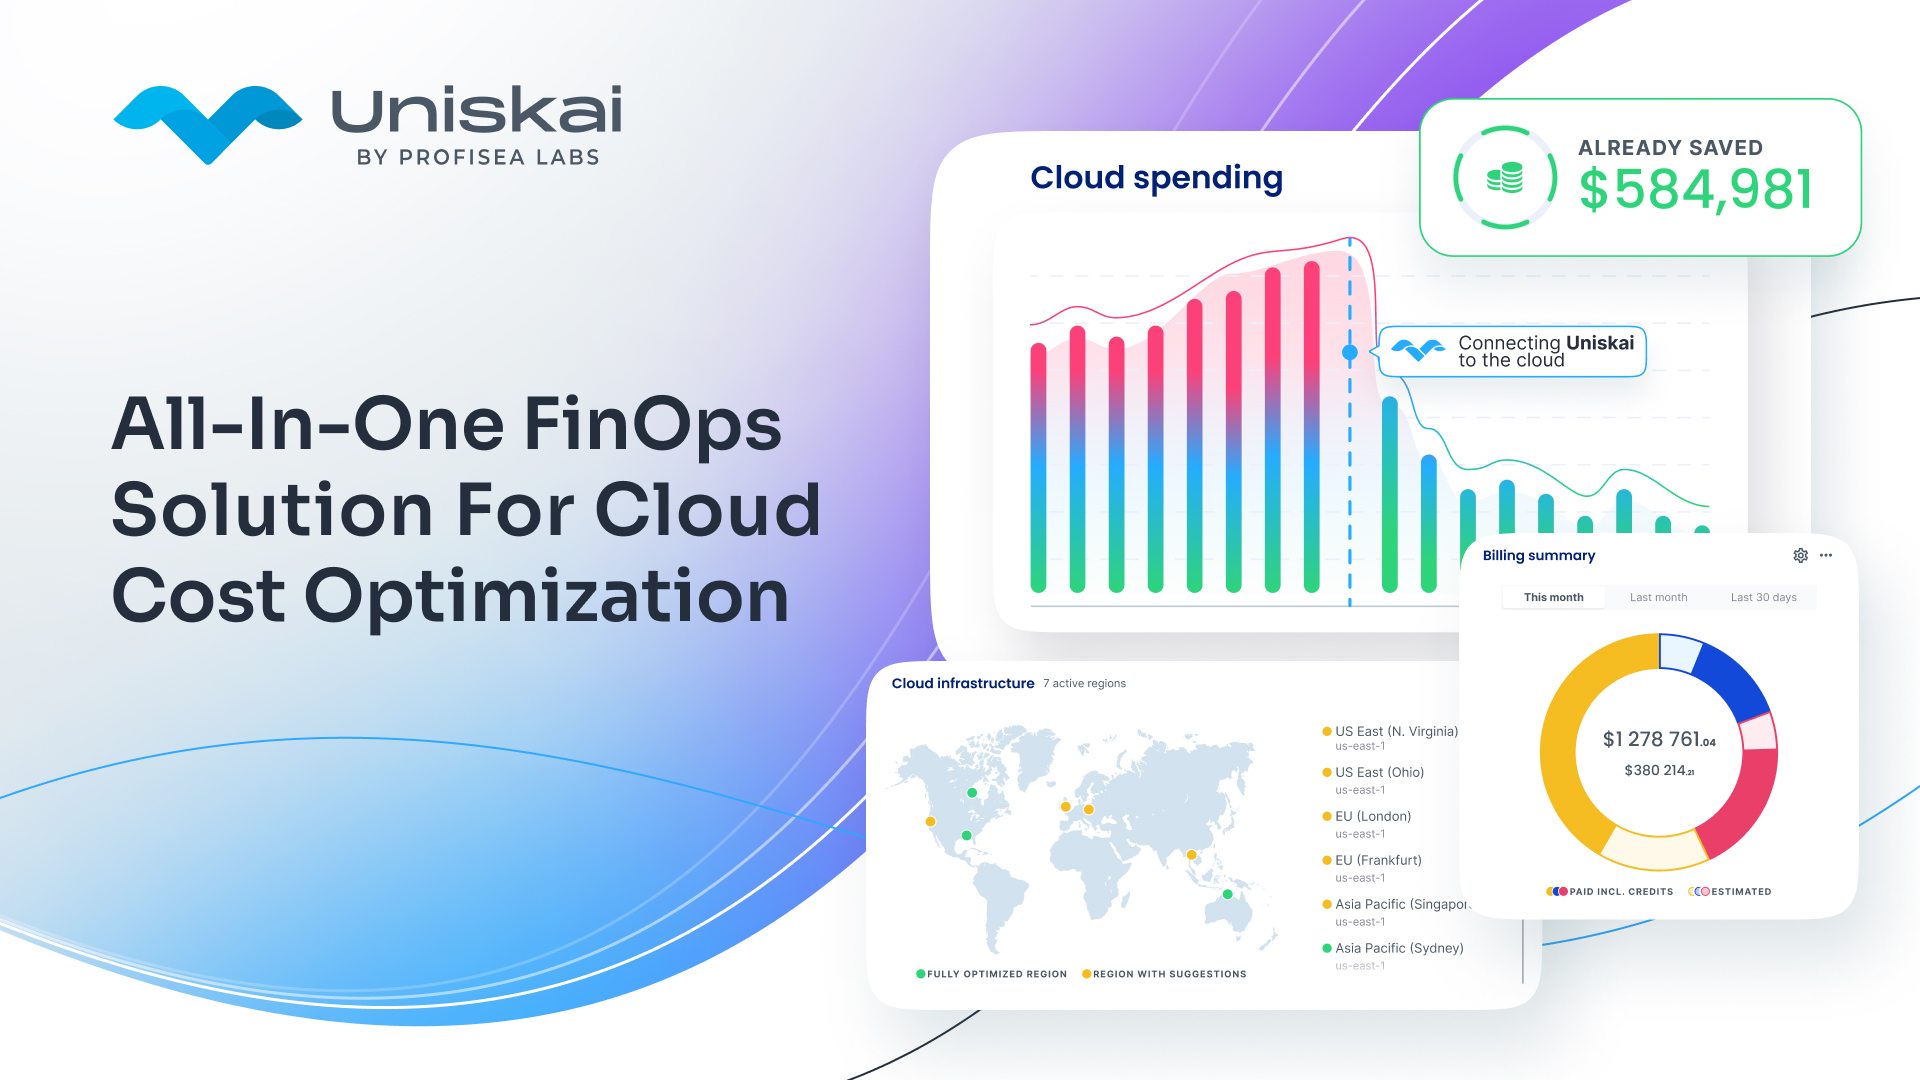 Uniskai by Profisea Labs is likely the most comprehensive AI-driven cloud cost reduction platform that can save up to 75% of your monthly cloud bills via rich network visibility, AI-generated policies, and detailed actionable reports.